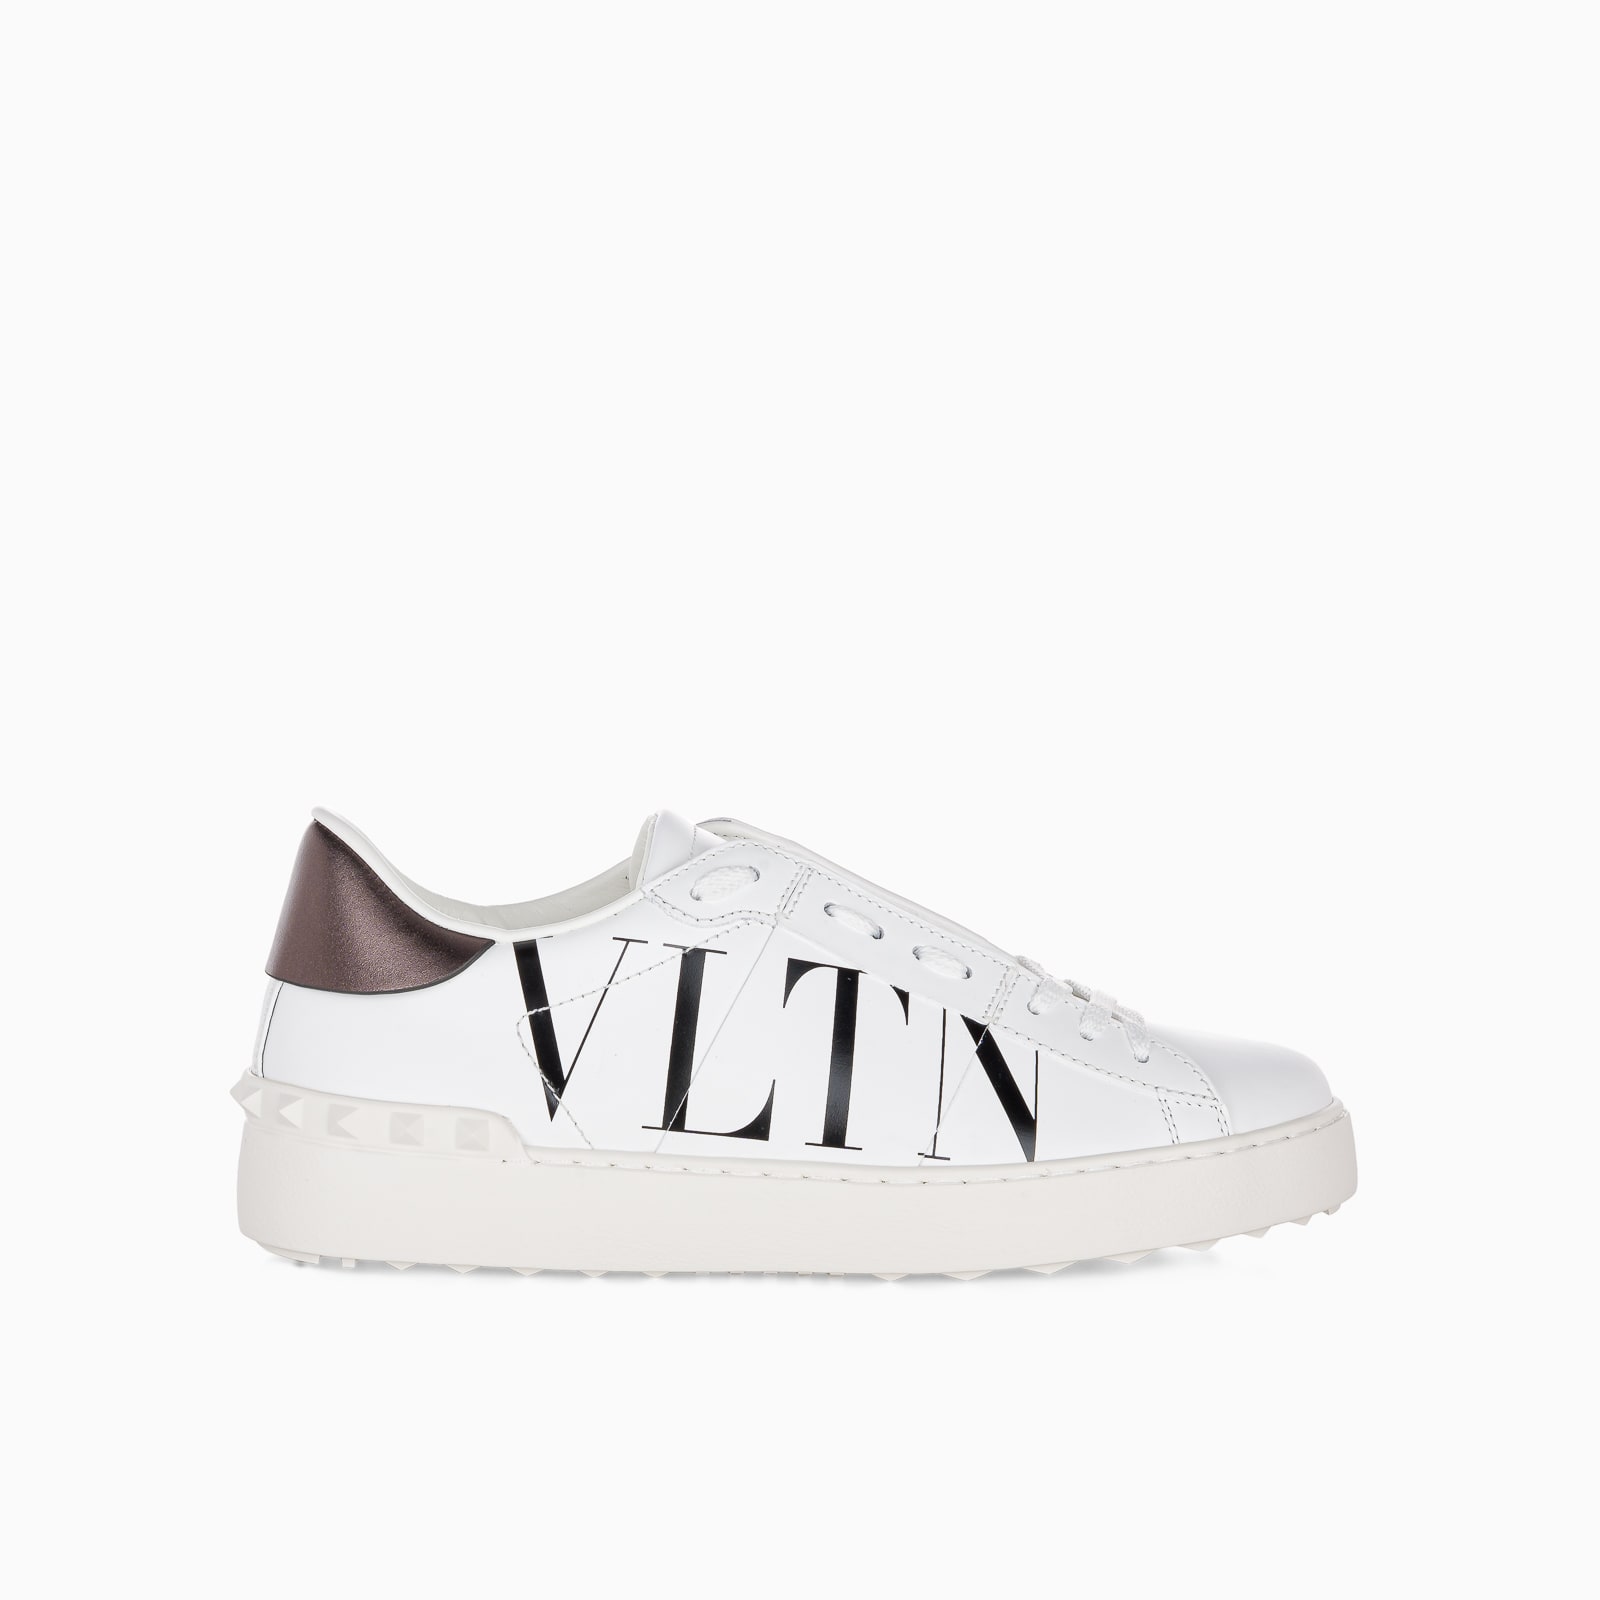 Buy Valentino Open Calfskin Sneaker online, shop Valentino shoes with free shipping